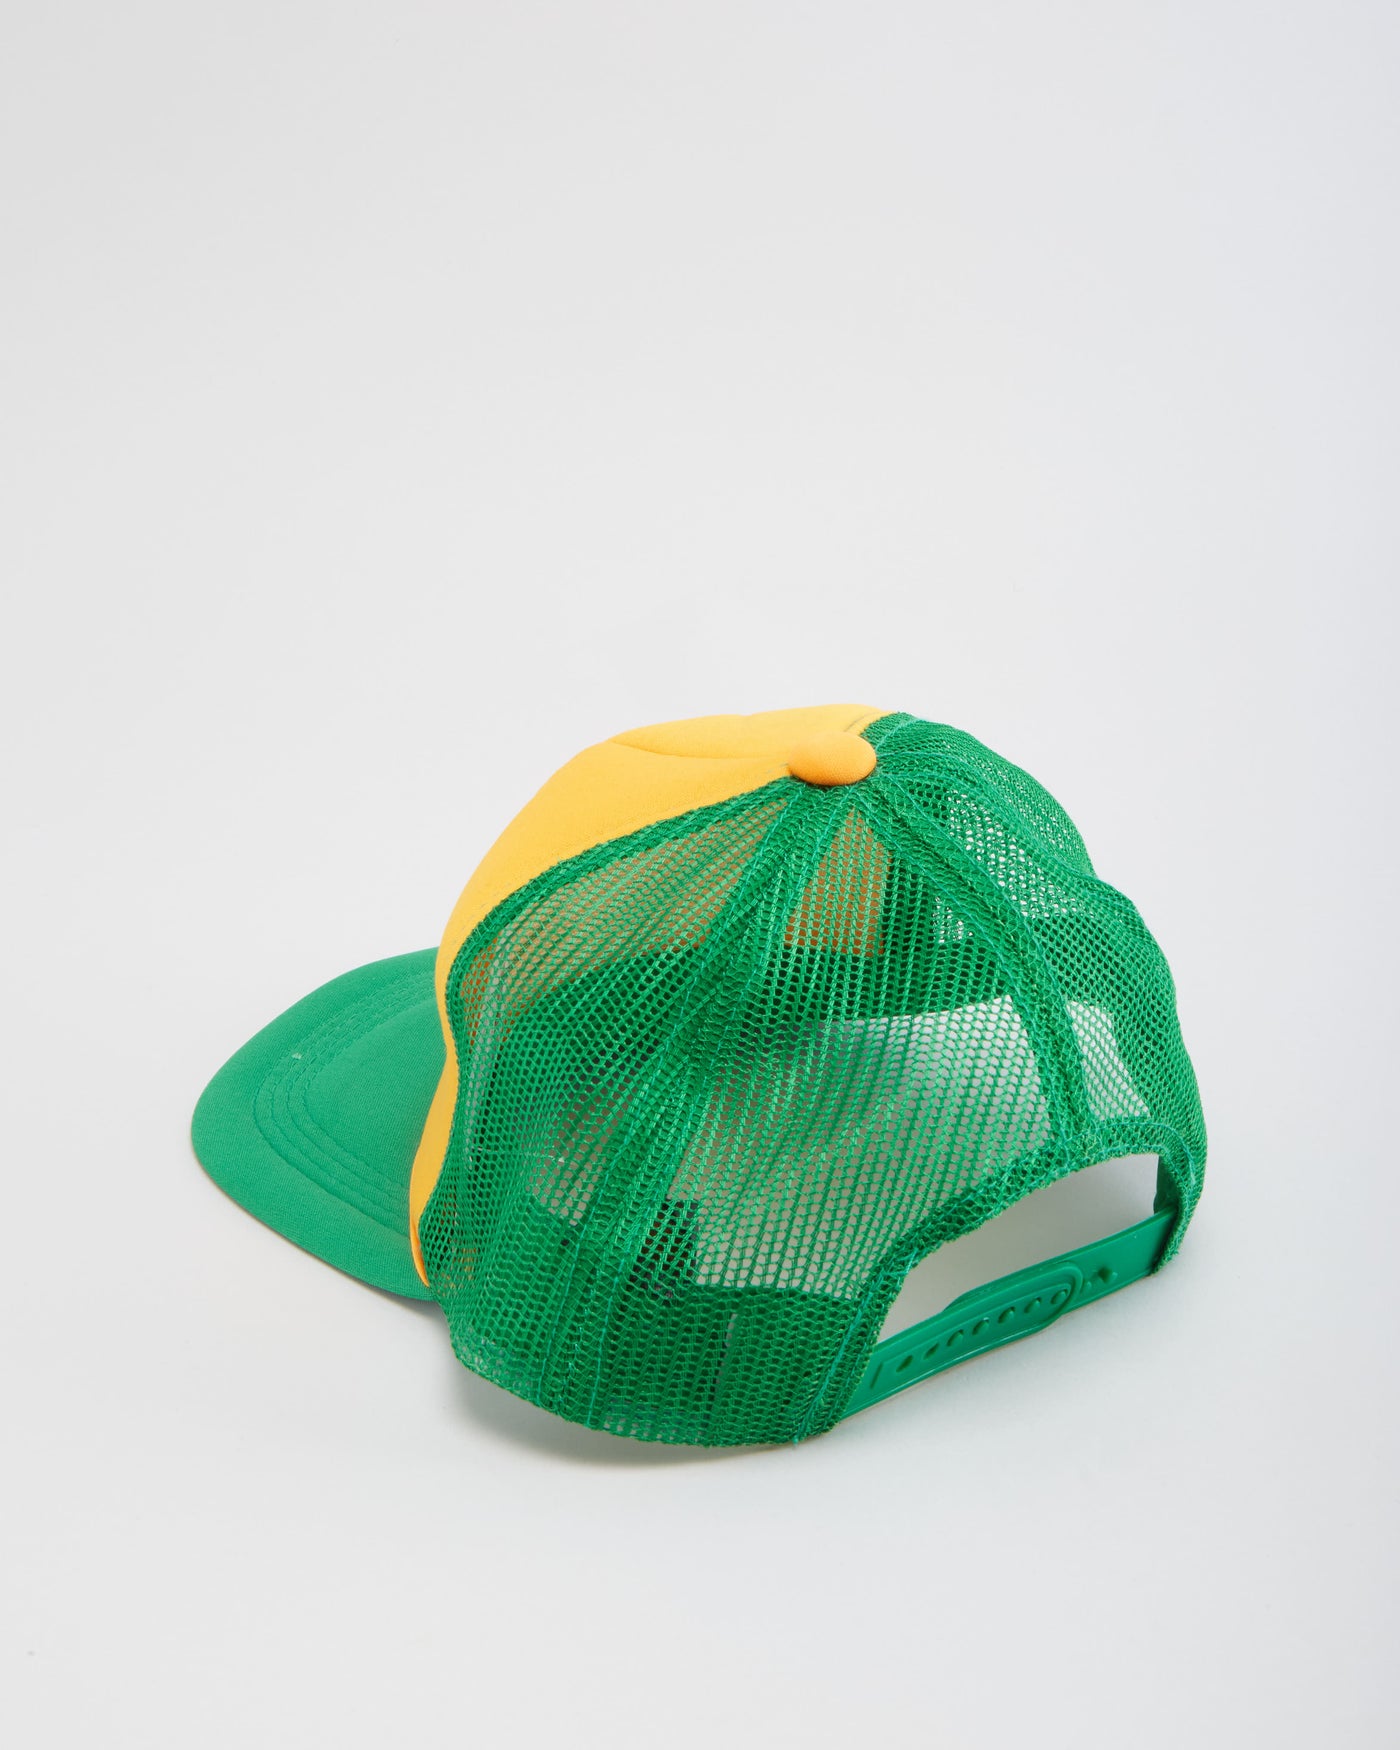 Stranger Things Camp Know Where '85 Green / Yellow Trucker Hat